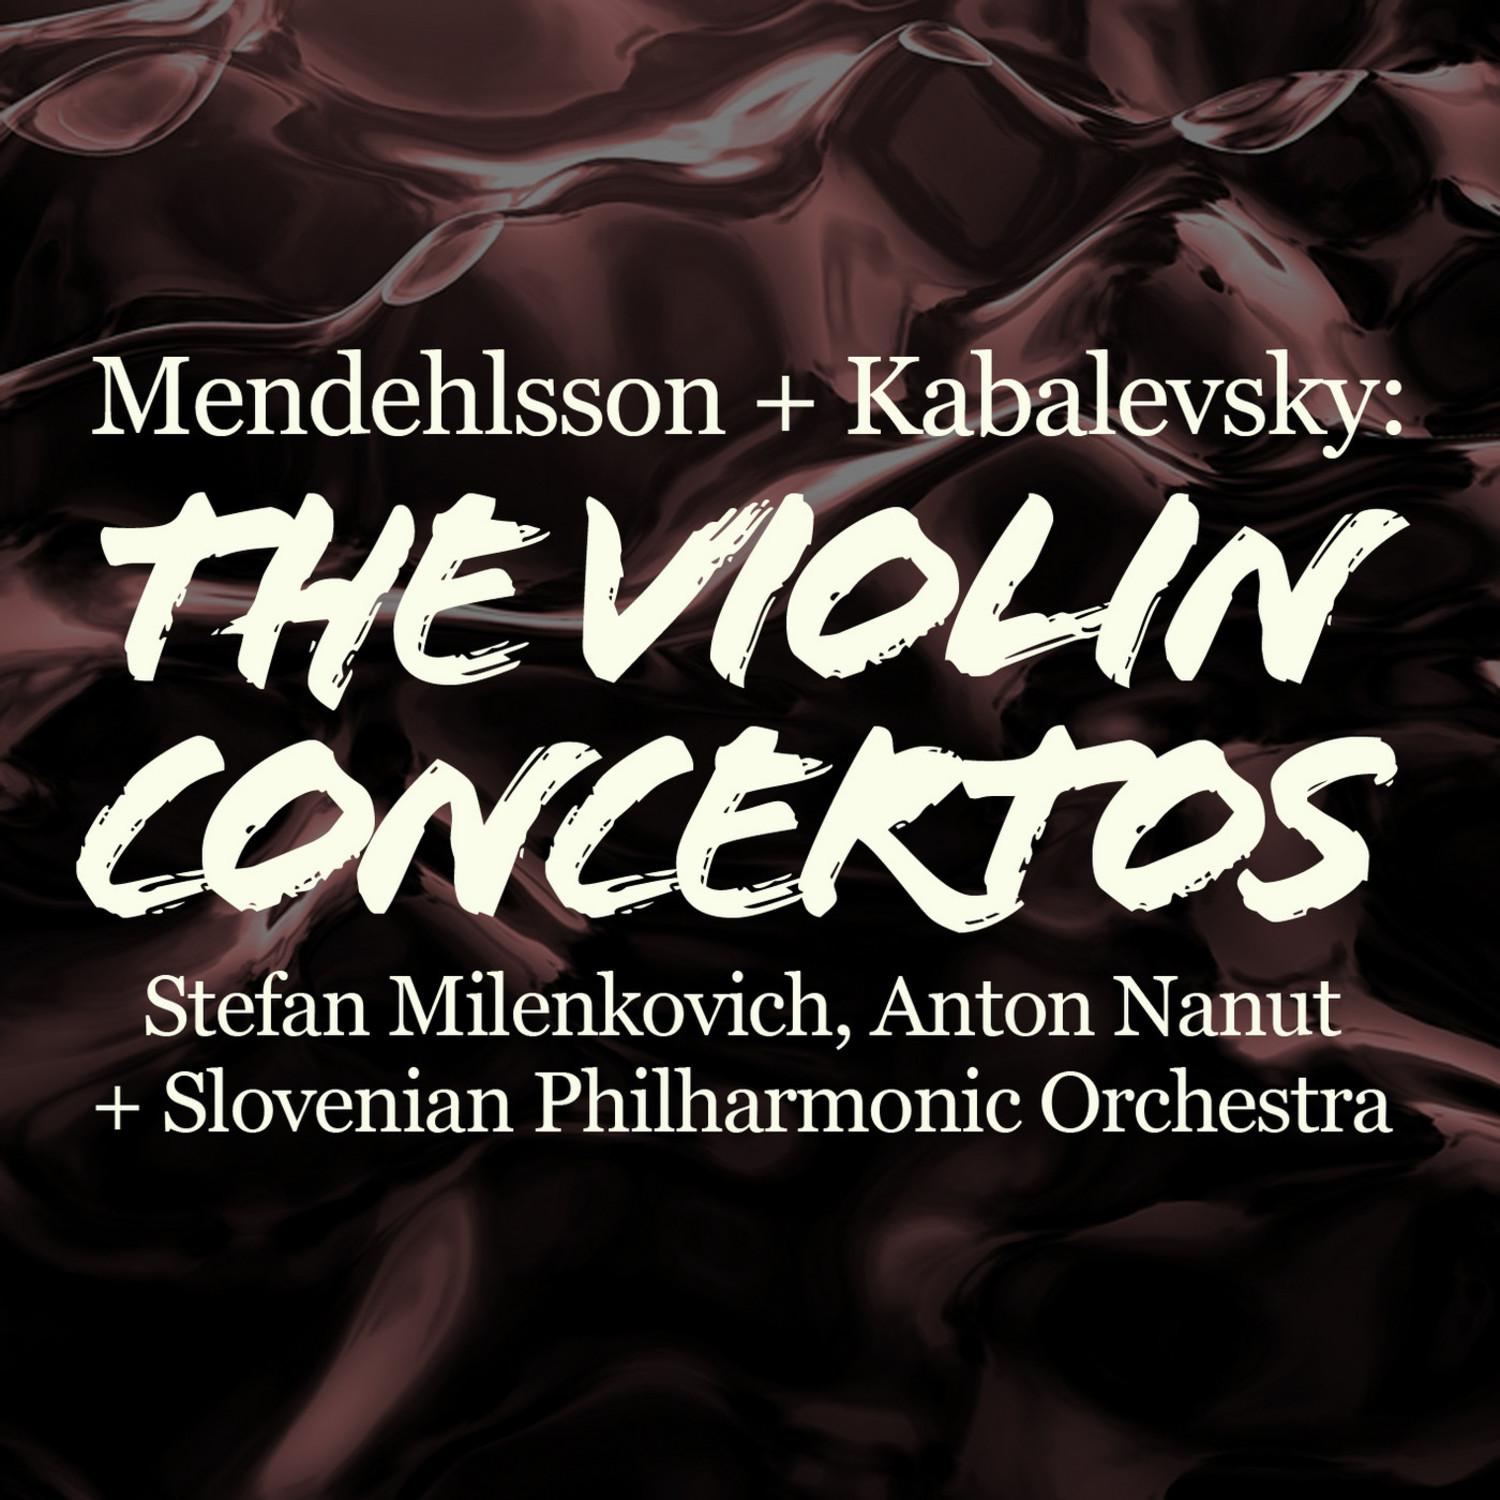 Concerto in C Major for Violin and Orchestra, Op. 48: II. Andantino cantabile